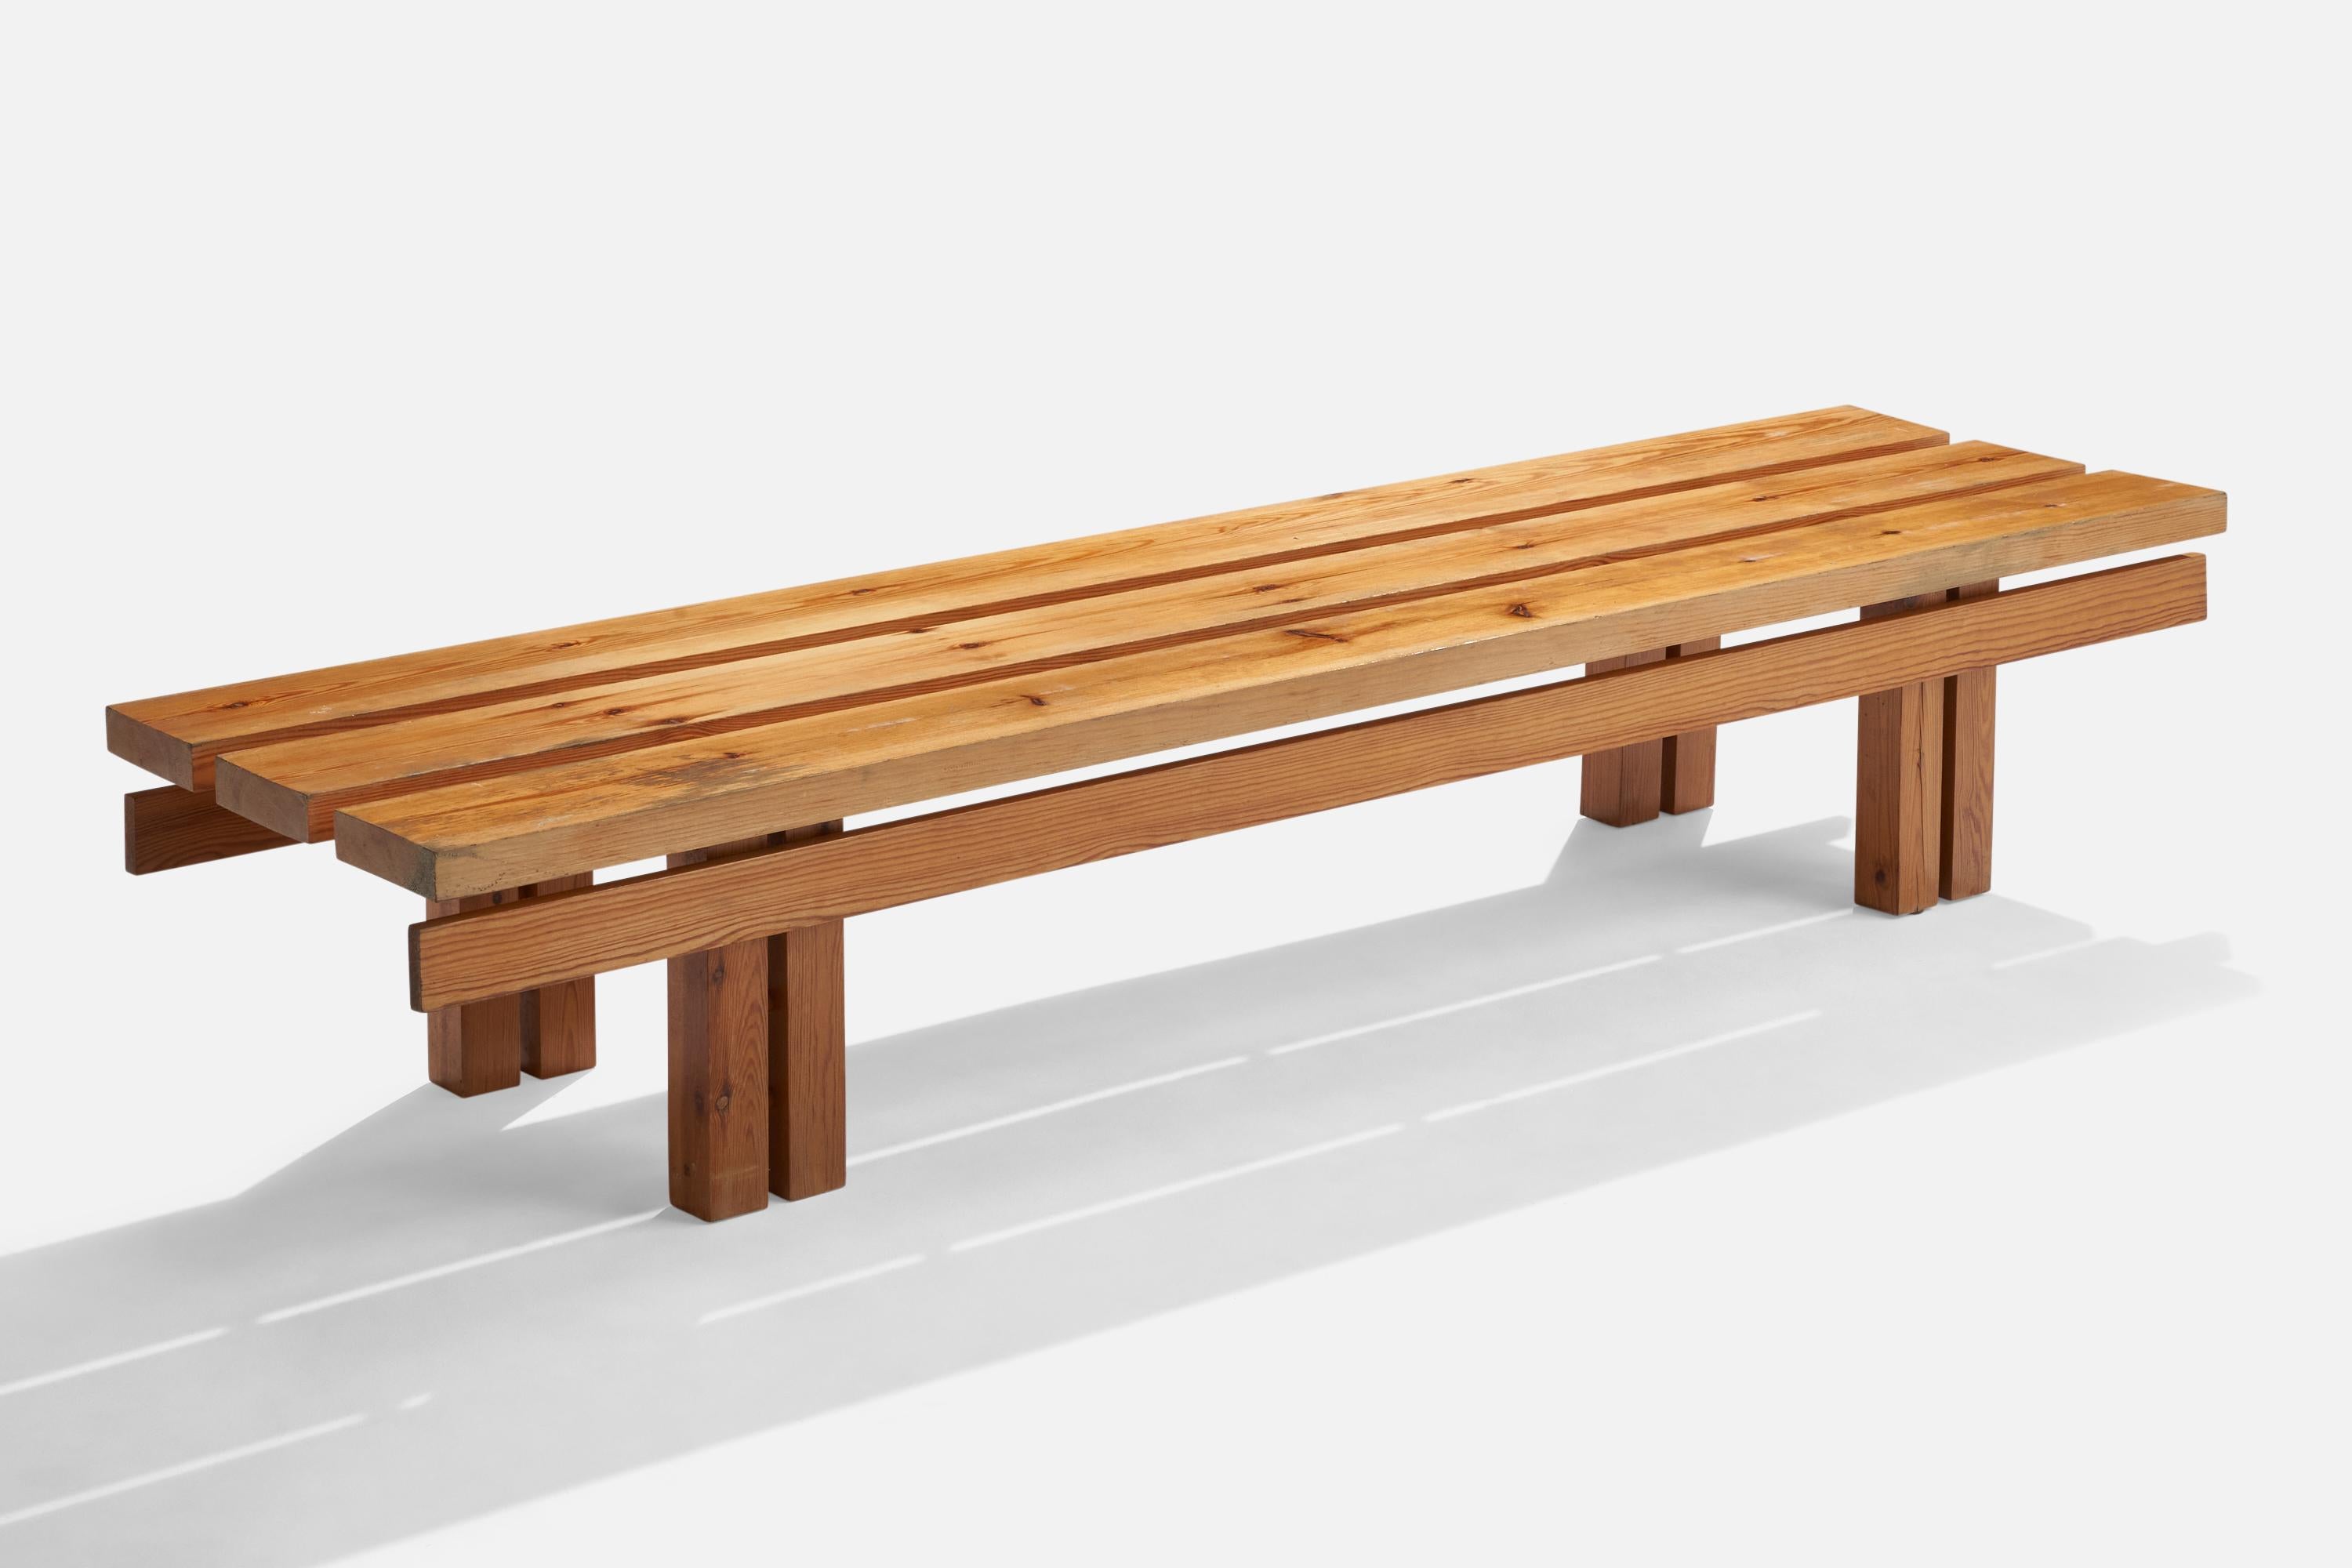 A pine bench designed and produced in Sweden, 1970s.

Seat height 13.5”